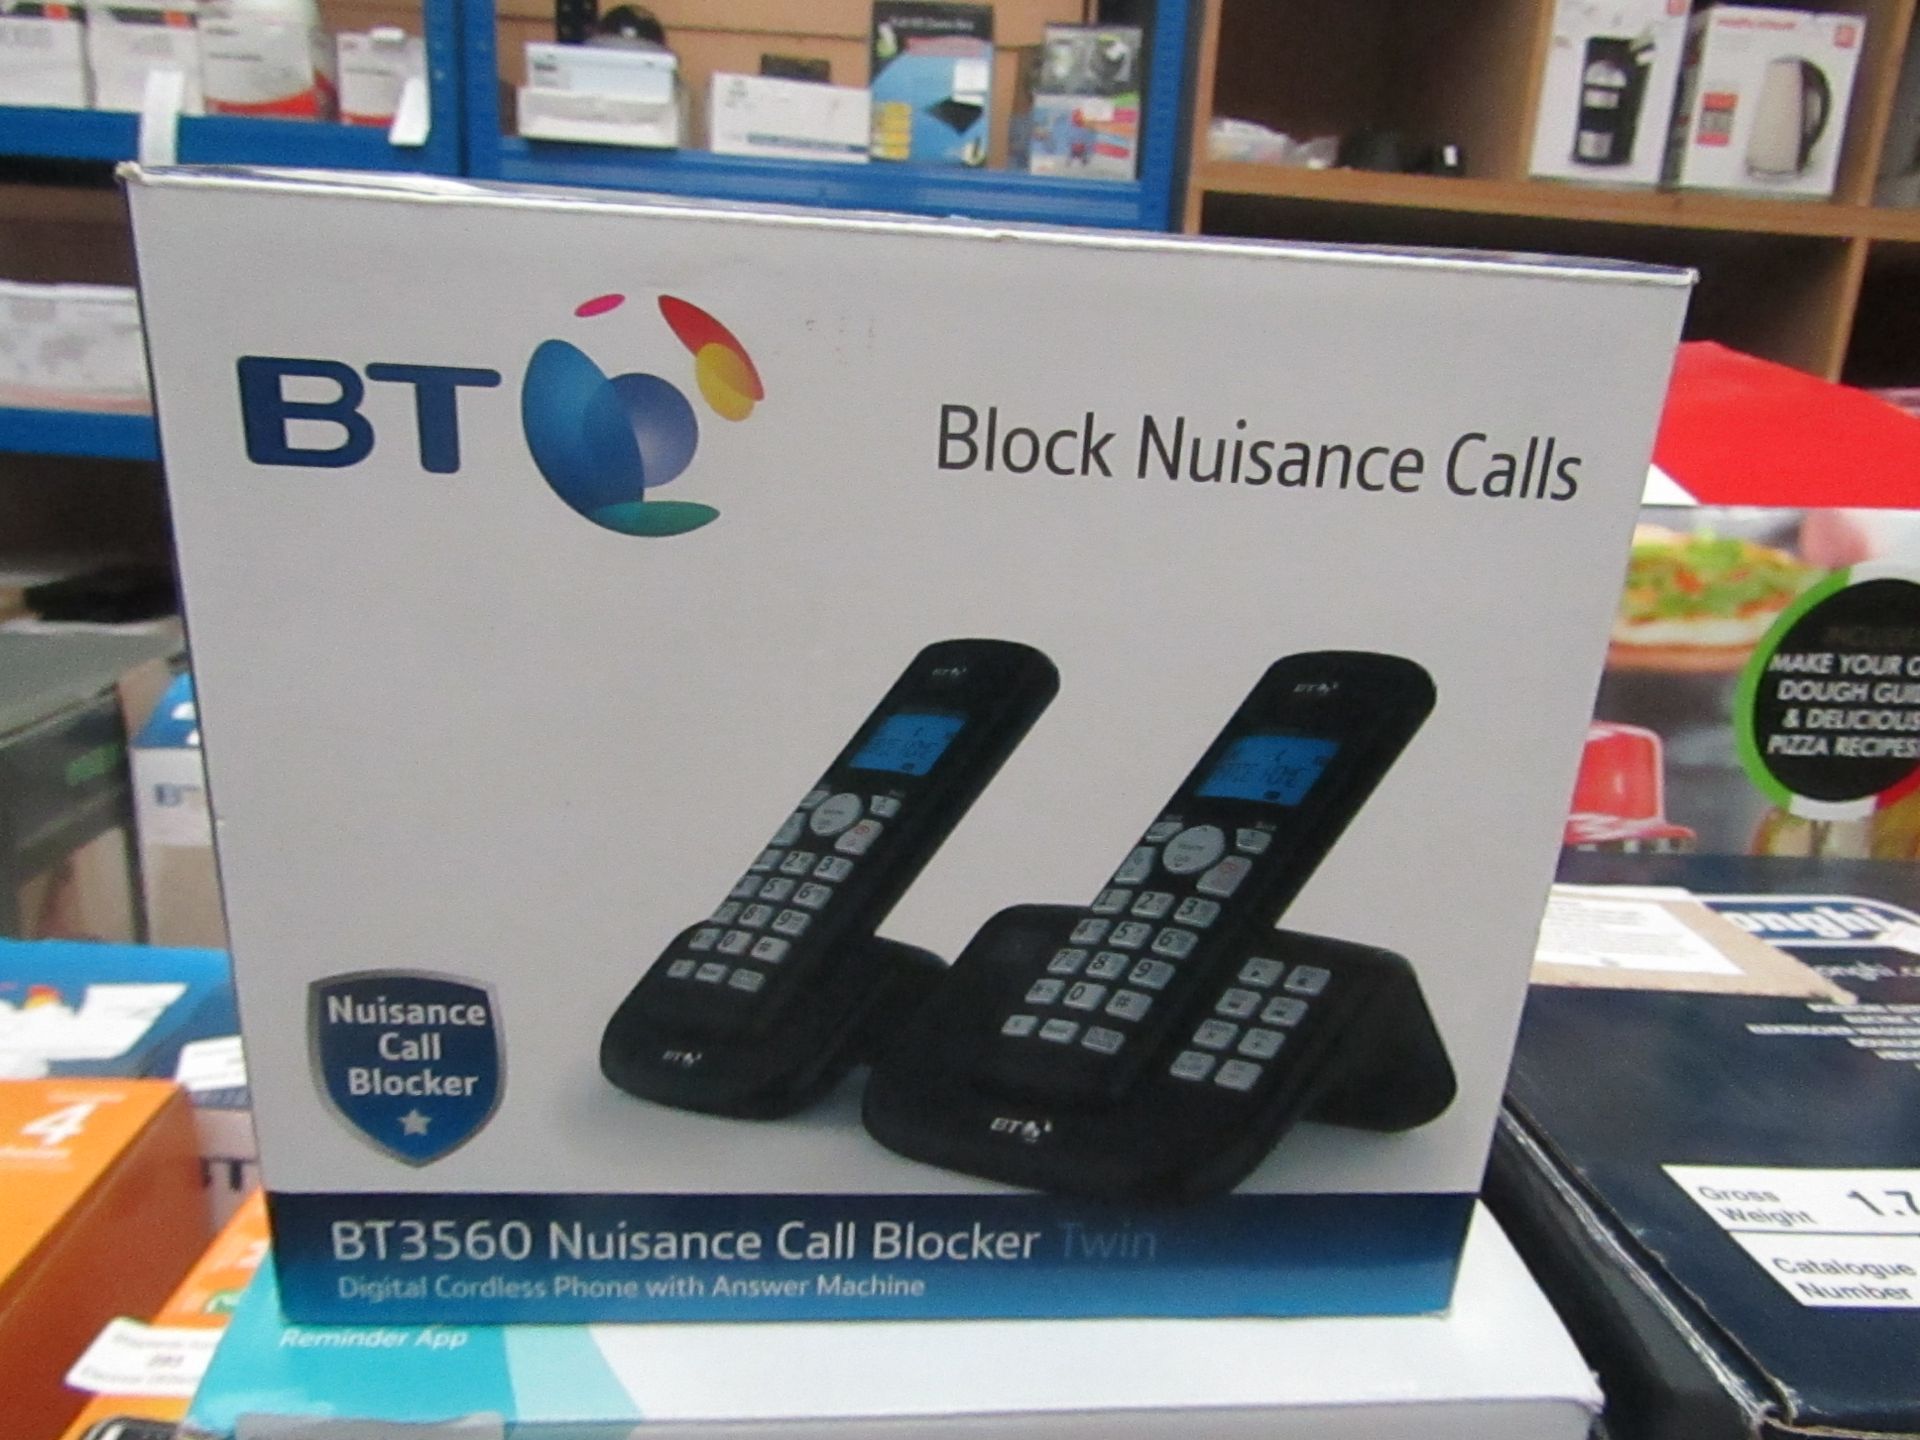 BT BT3560 nuisance call blocker twin digital cordless phone with answering machine, complete but